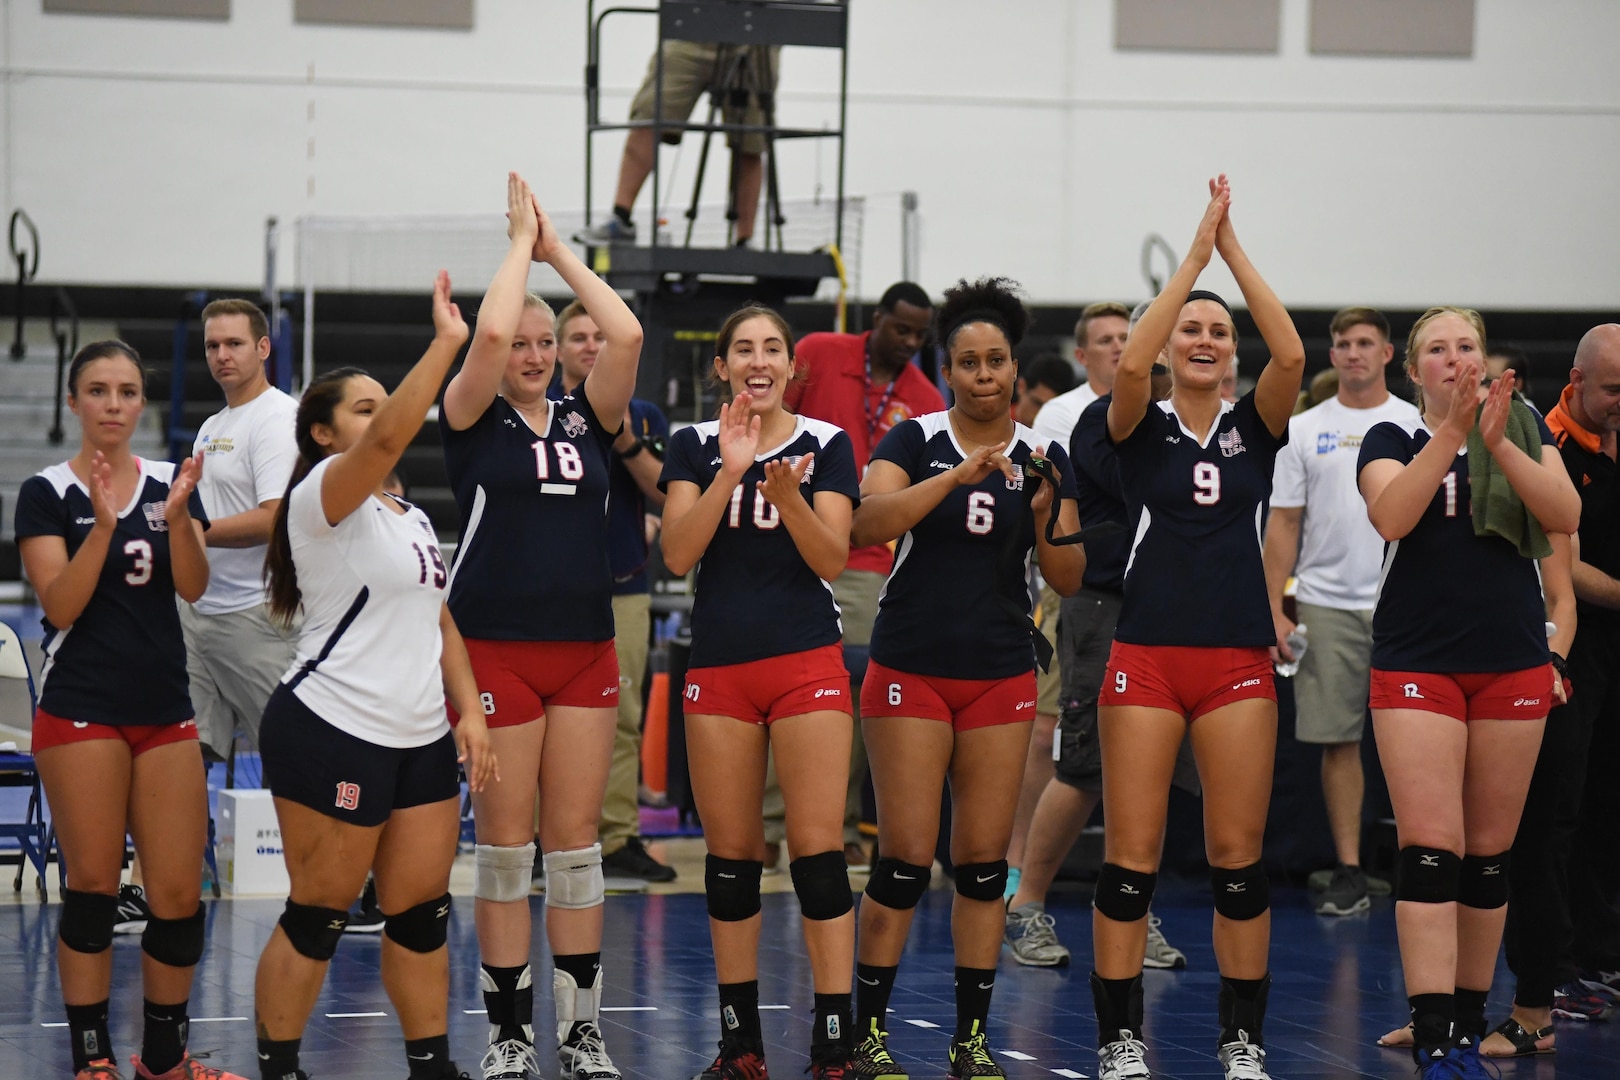 USA celebrates their victory over the Netherlands in match 8 of the 18th Conseil International du Sport Militaire (CISM) World Women’s Volleyball Military Championship on 7 June 2017 at Naval Station Mayport, Florida. USA will face China in the finals here at the Mayport Fitness Center on June 9th. (Photo by Petty Officer Timothy Schumaker, NPASE Southeast)